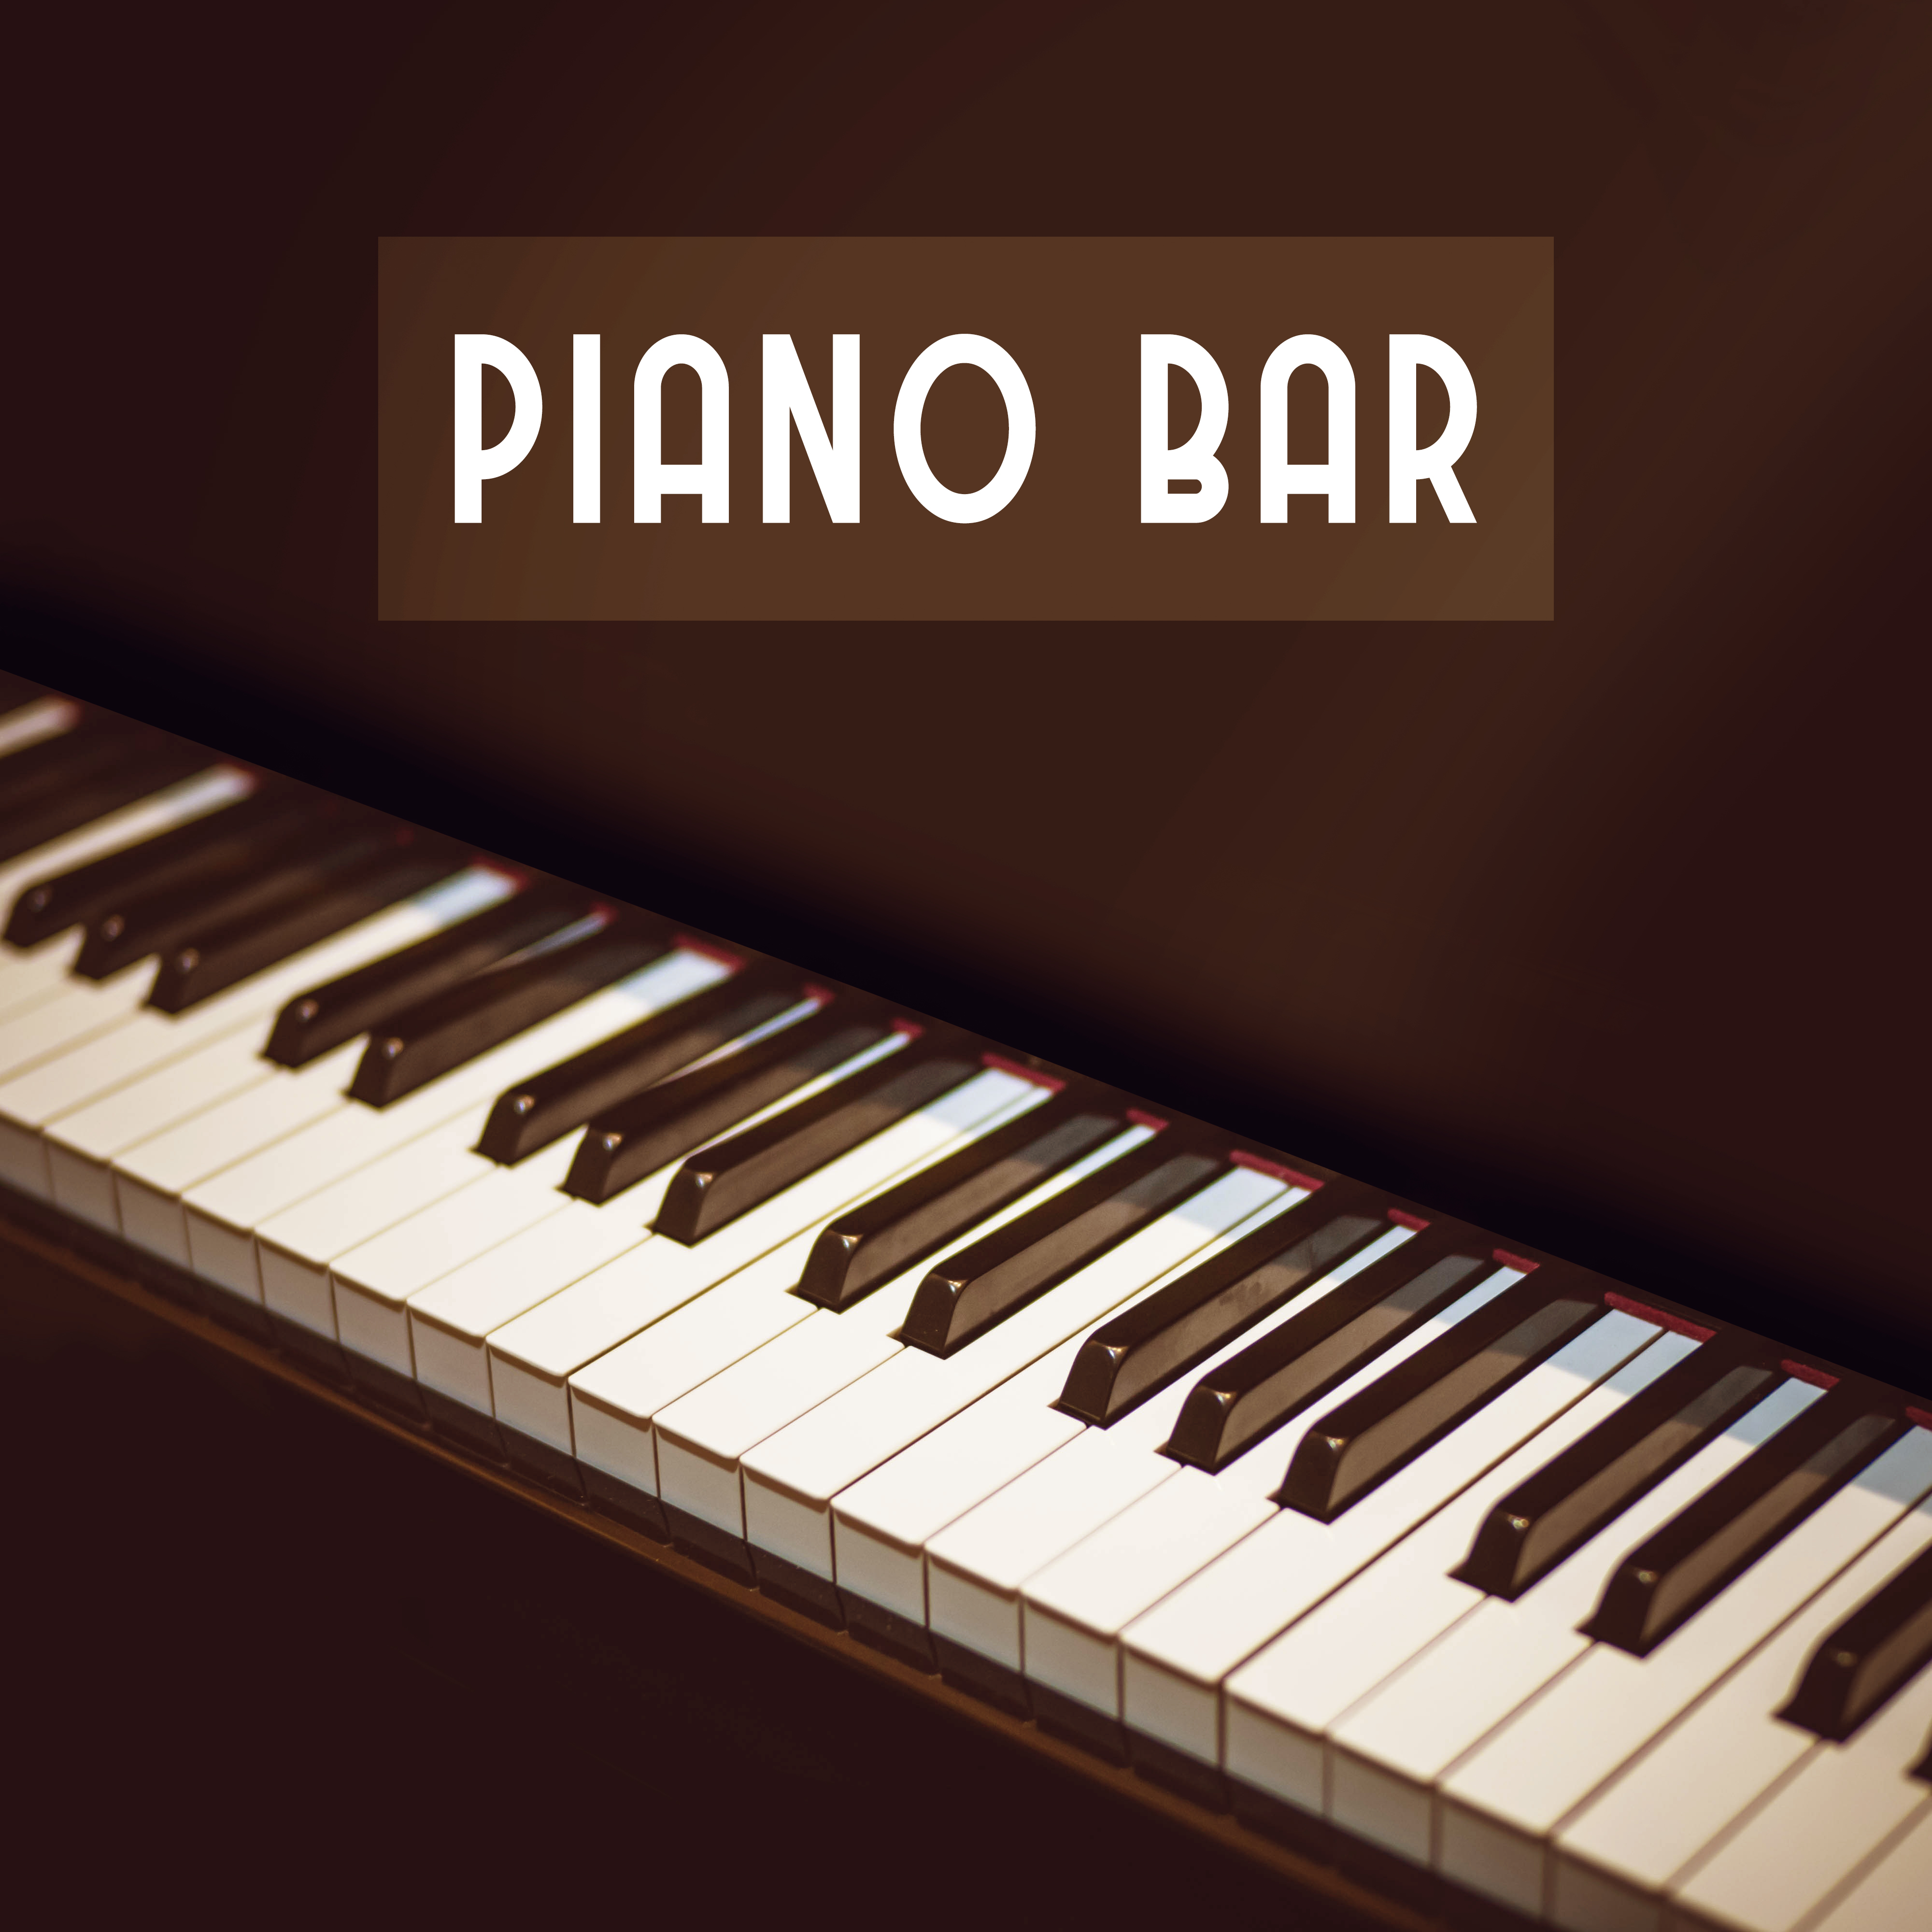 Piano Bar – Restaurant Jazz, Relax with Family, Instrumental Songs, Perfect Evening